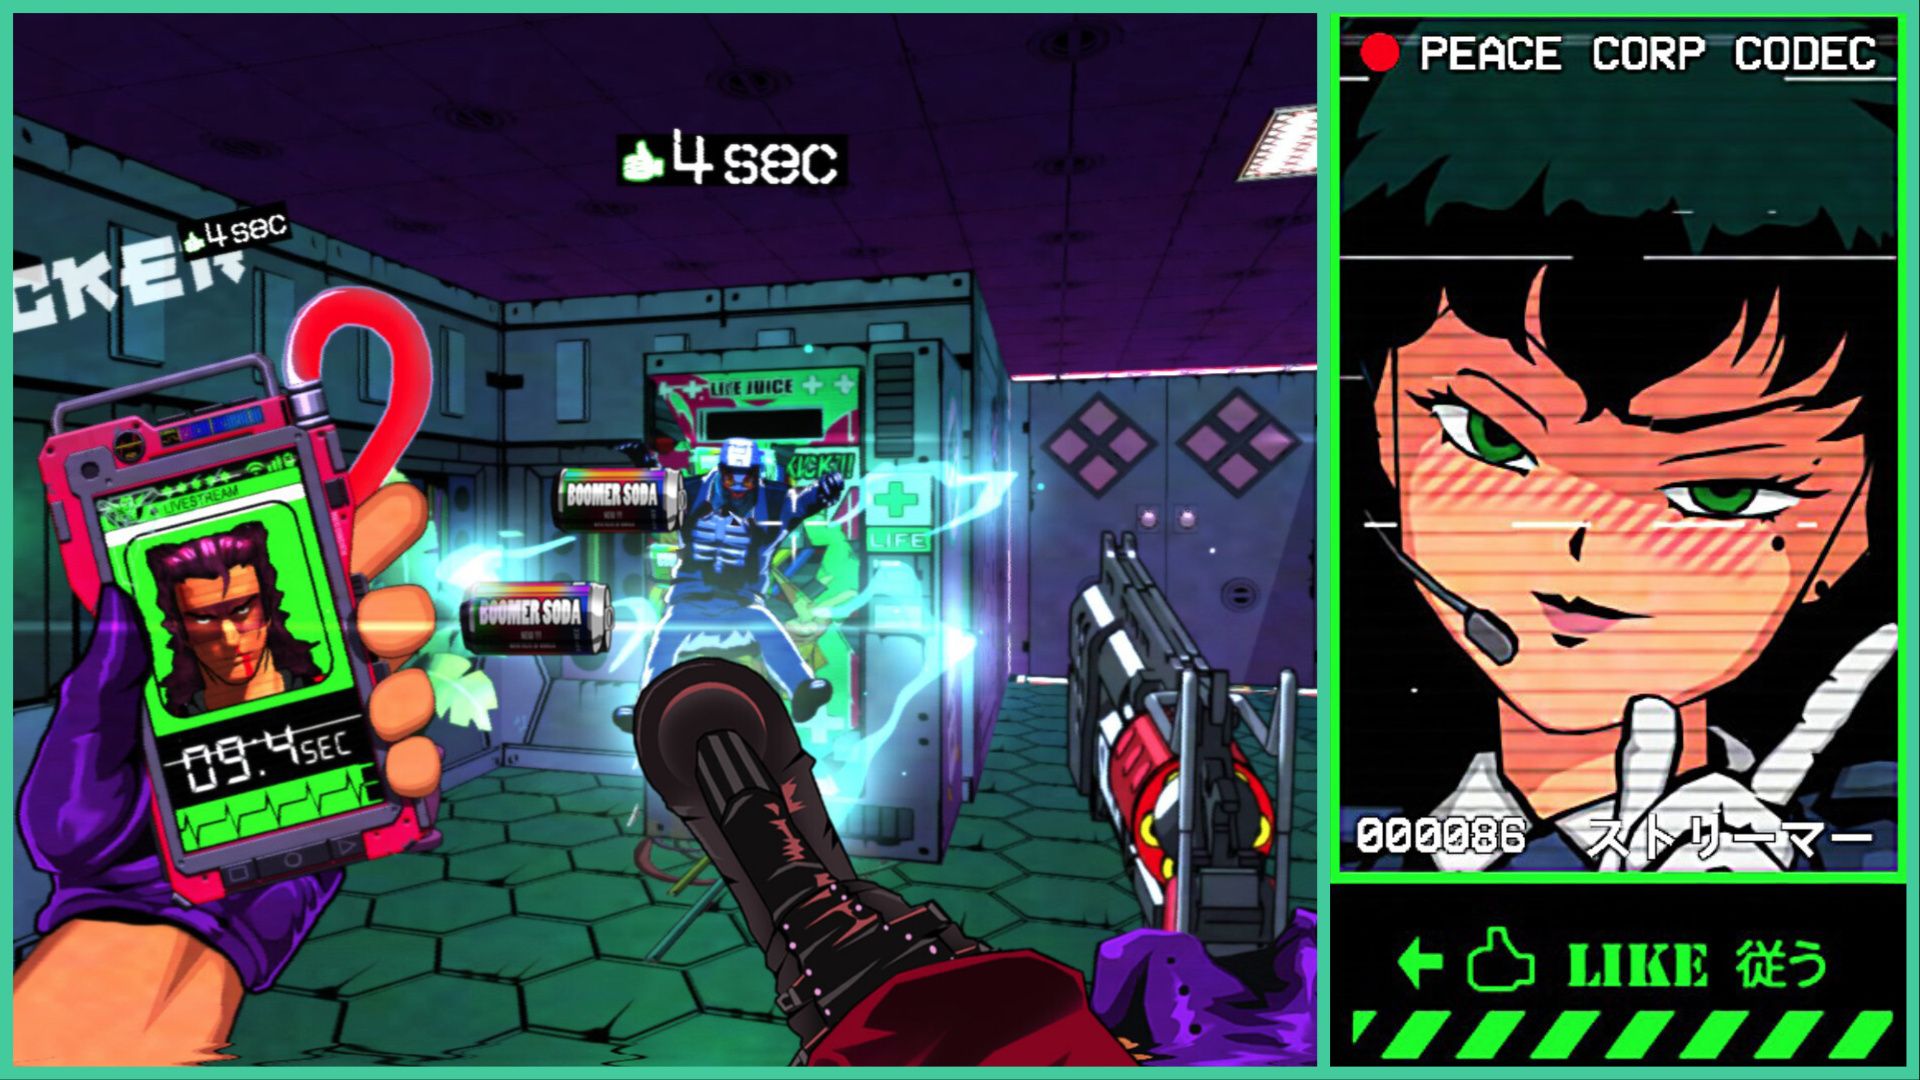 feature image for our mullet mad jack news, the image features a screenshot from the game of mad jack kicking a robot into a health vending machine as 'boomer soda' flies out, mad jack is holding on to a device that has a countdown, with 9.4 seconds left on the clock, to the side is another screenshot from the game of a female character pointing her finger and smirking as she has a microphone close to her mouth on her headset, there is text above to show that this is from a video camera and reads "peace corp codec' with a filter over the woman that looks as if she's on camera